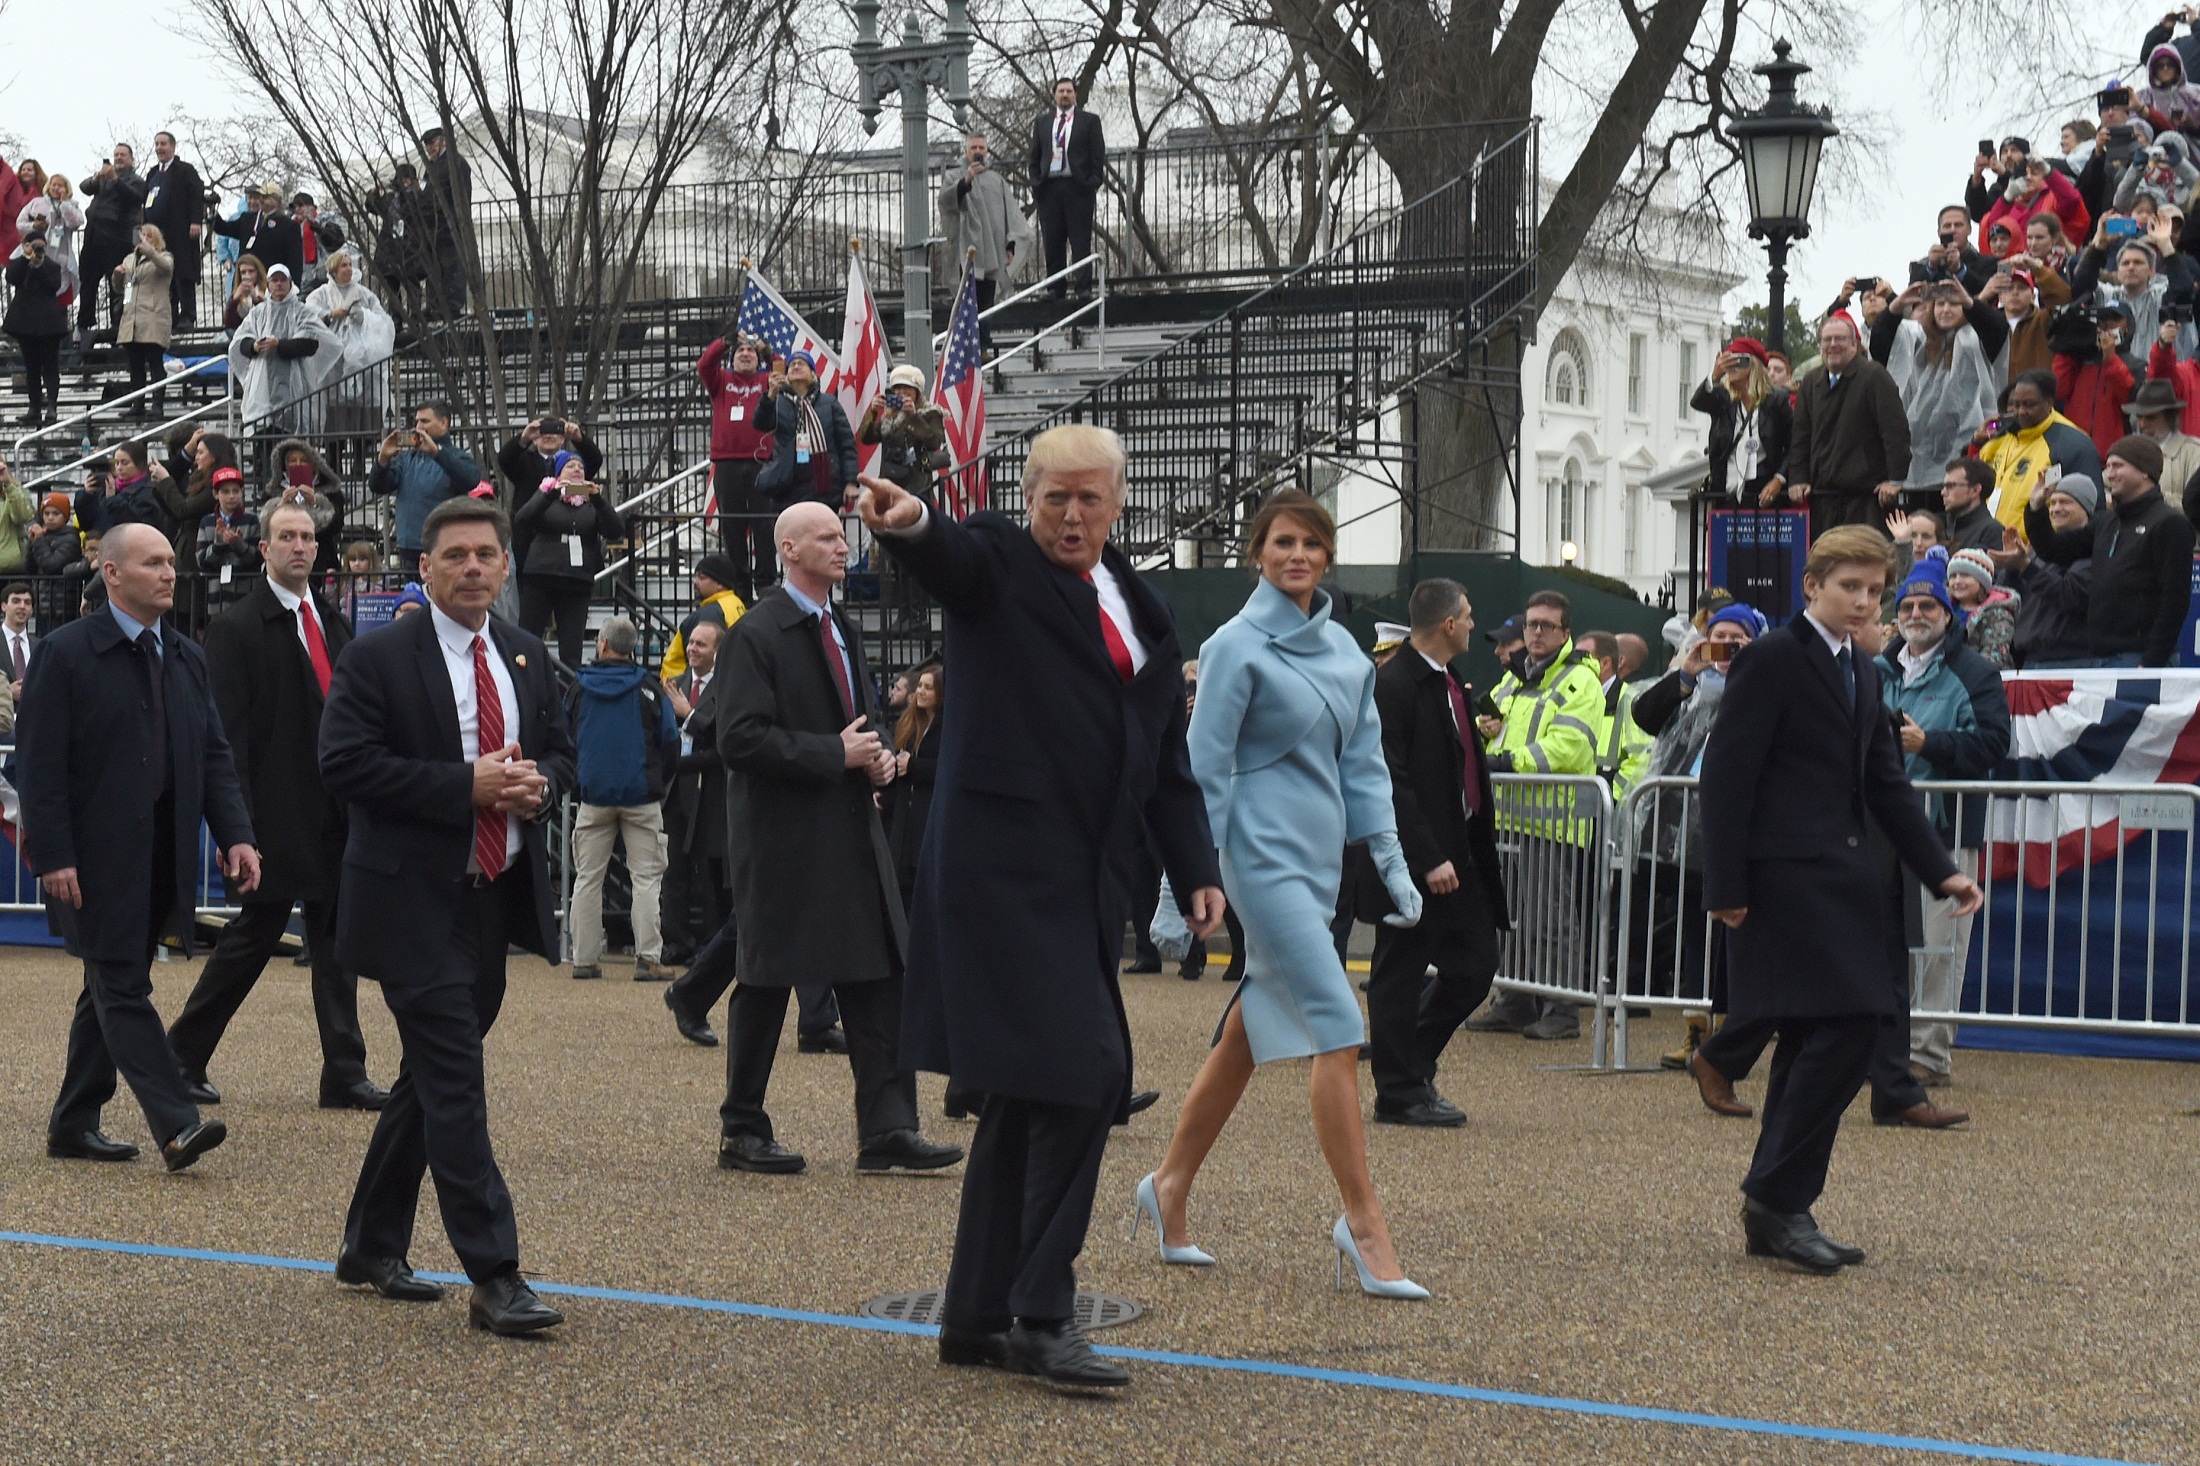 US President Donald Trump walks his son Barron (R) and wife Melania surrounded by Secret Service officers at the White House as the presidential inaugural parade winds through the nation's capital on January 20, 2017 in Washington, DC. / AFP PHOTO / Timothy A. CLARY